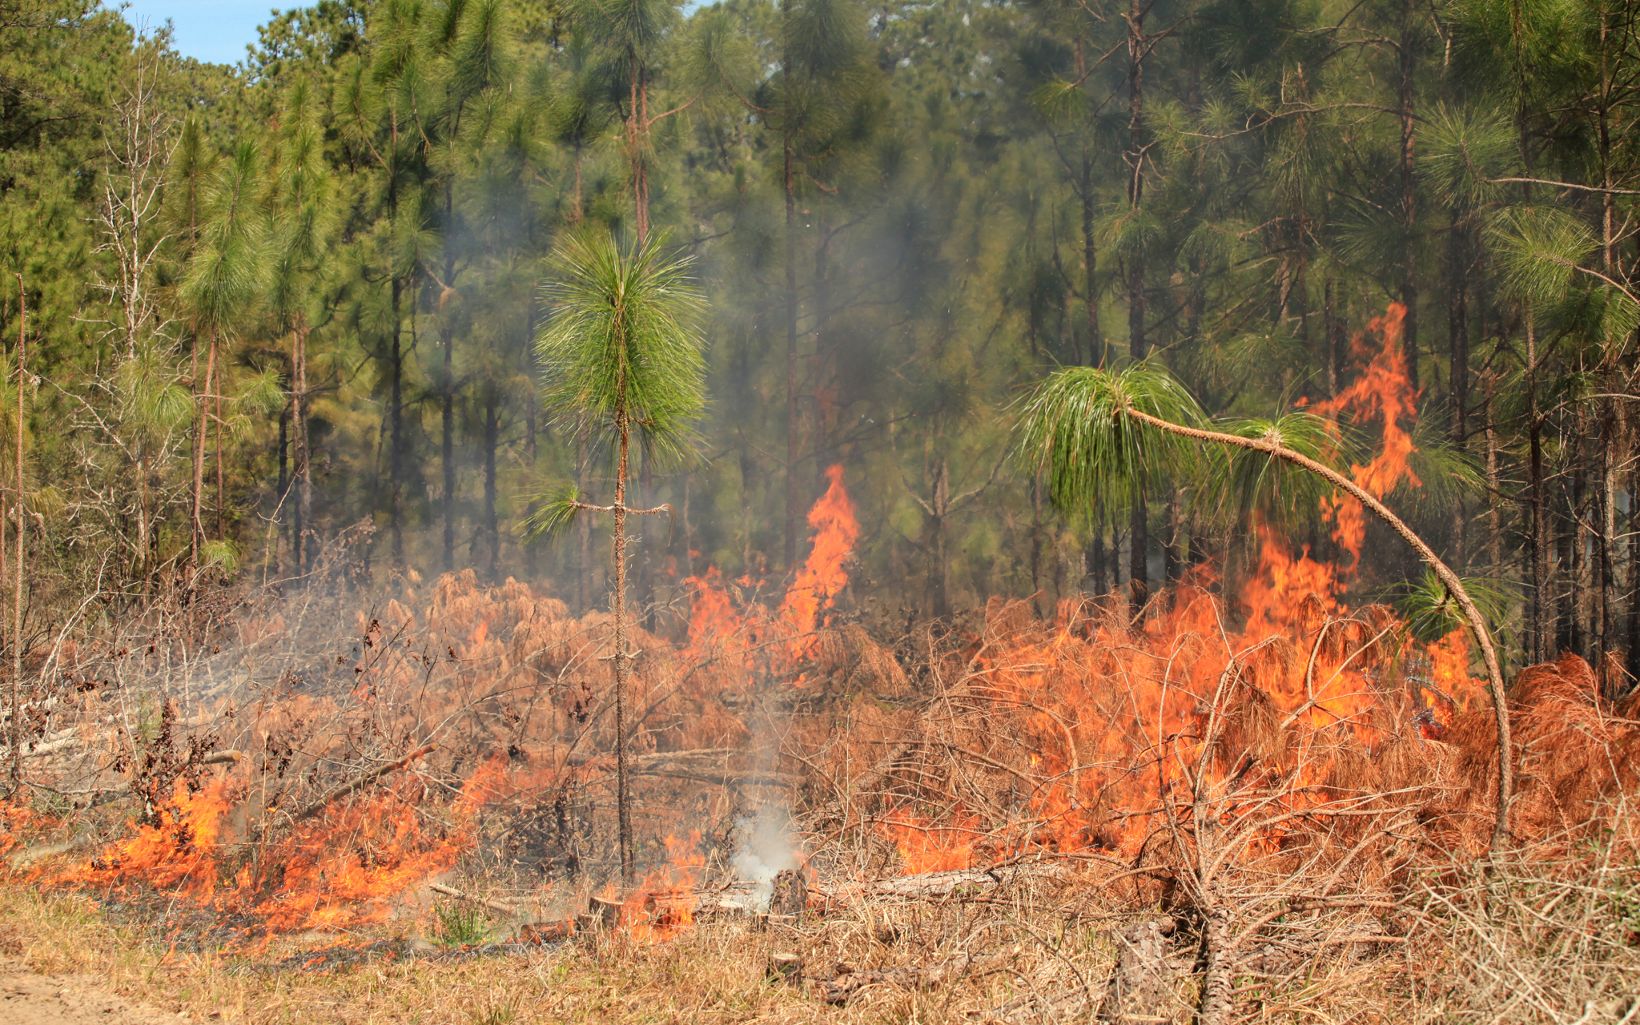 Low intensity flames lick at the floor of a longleaf pine forest with mature and candling trees.